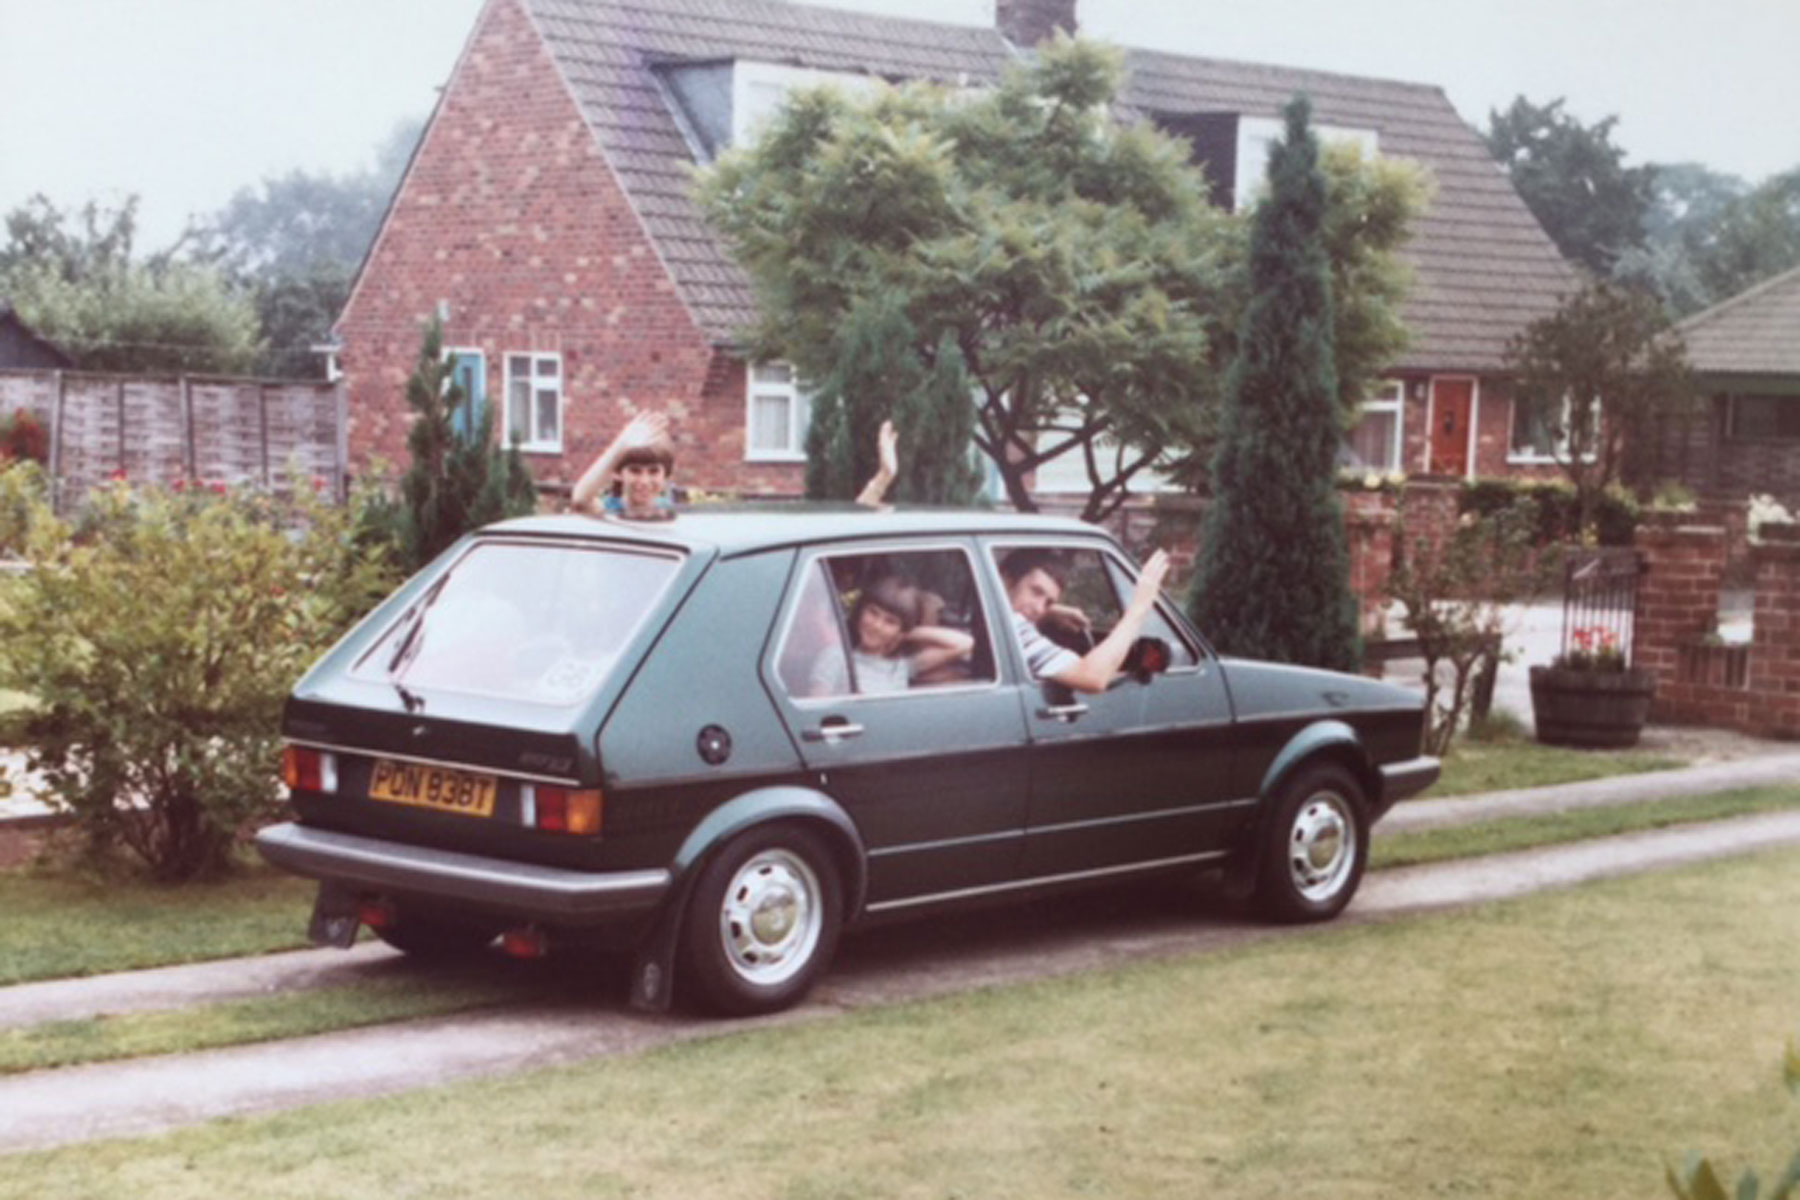 Karin Wilson has transported her family in Volkswagens since 1967